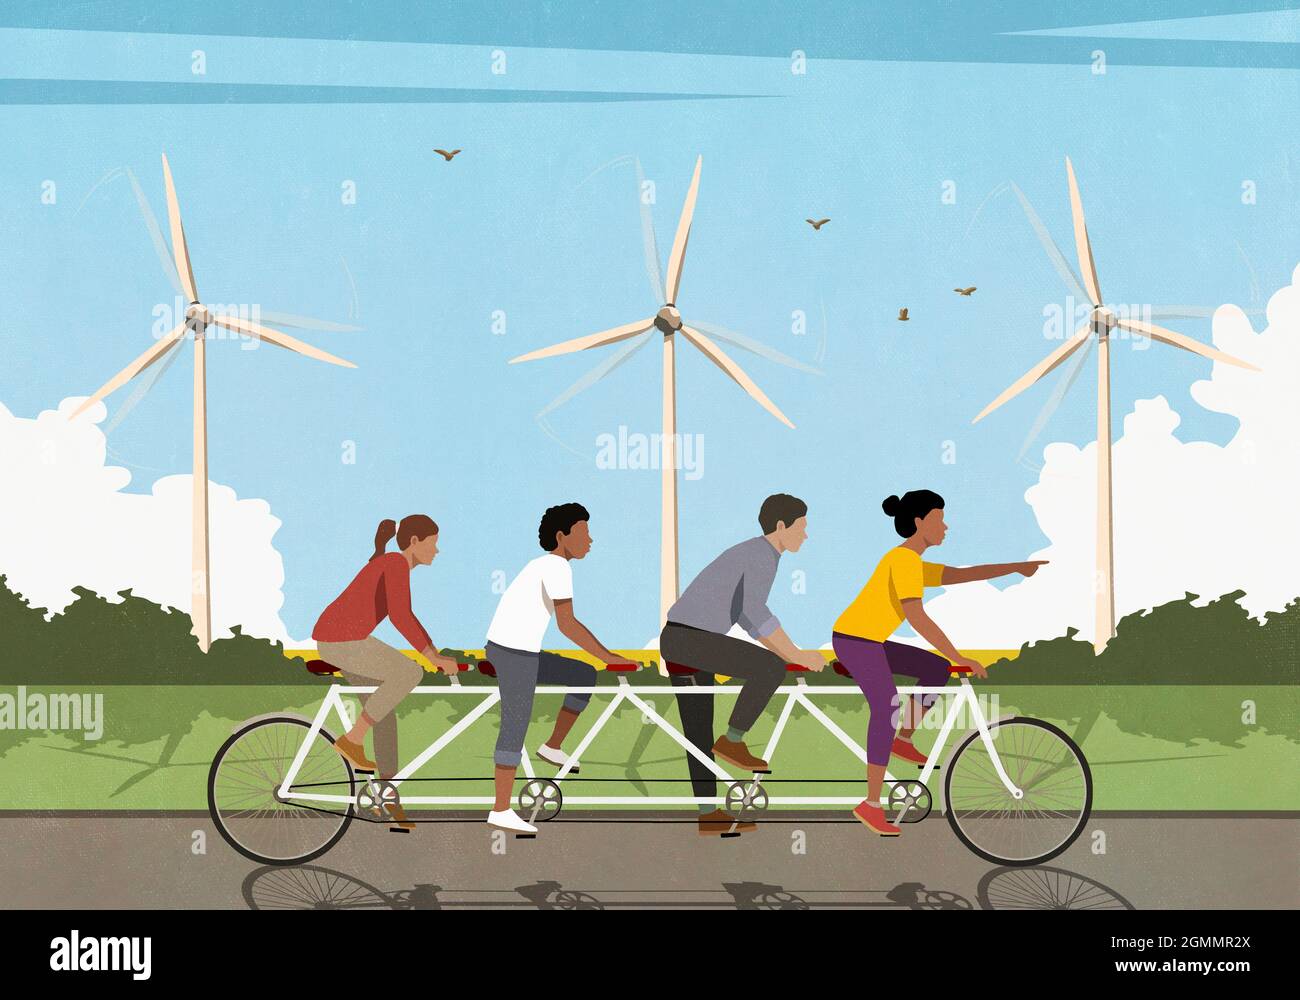 Friends riding tandem bicycle along idyllic field with wind turbines Stock Photo